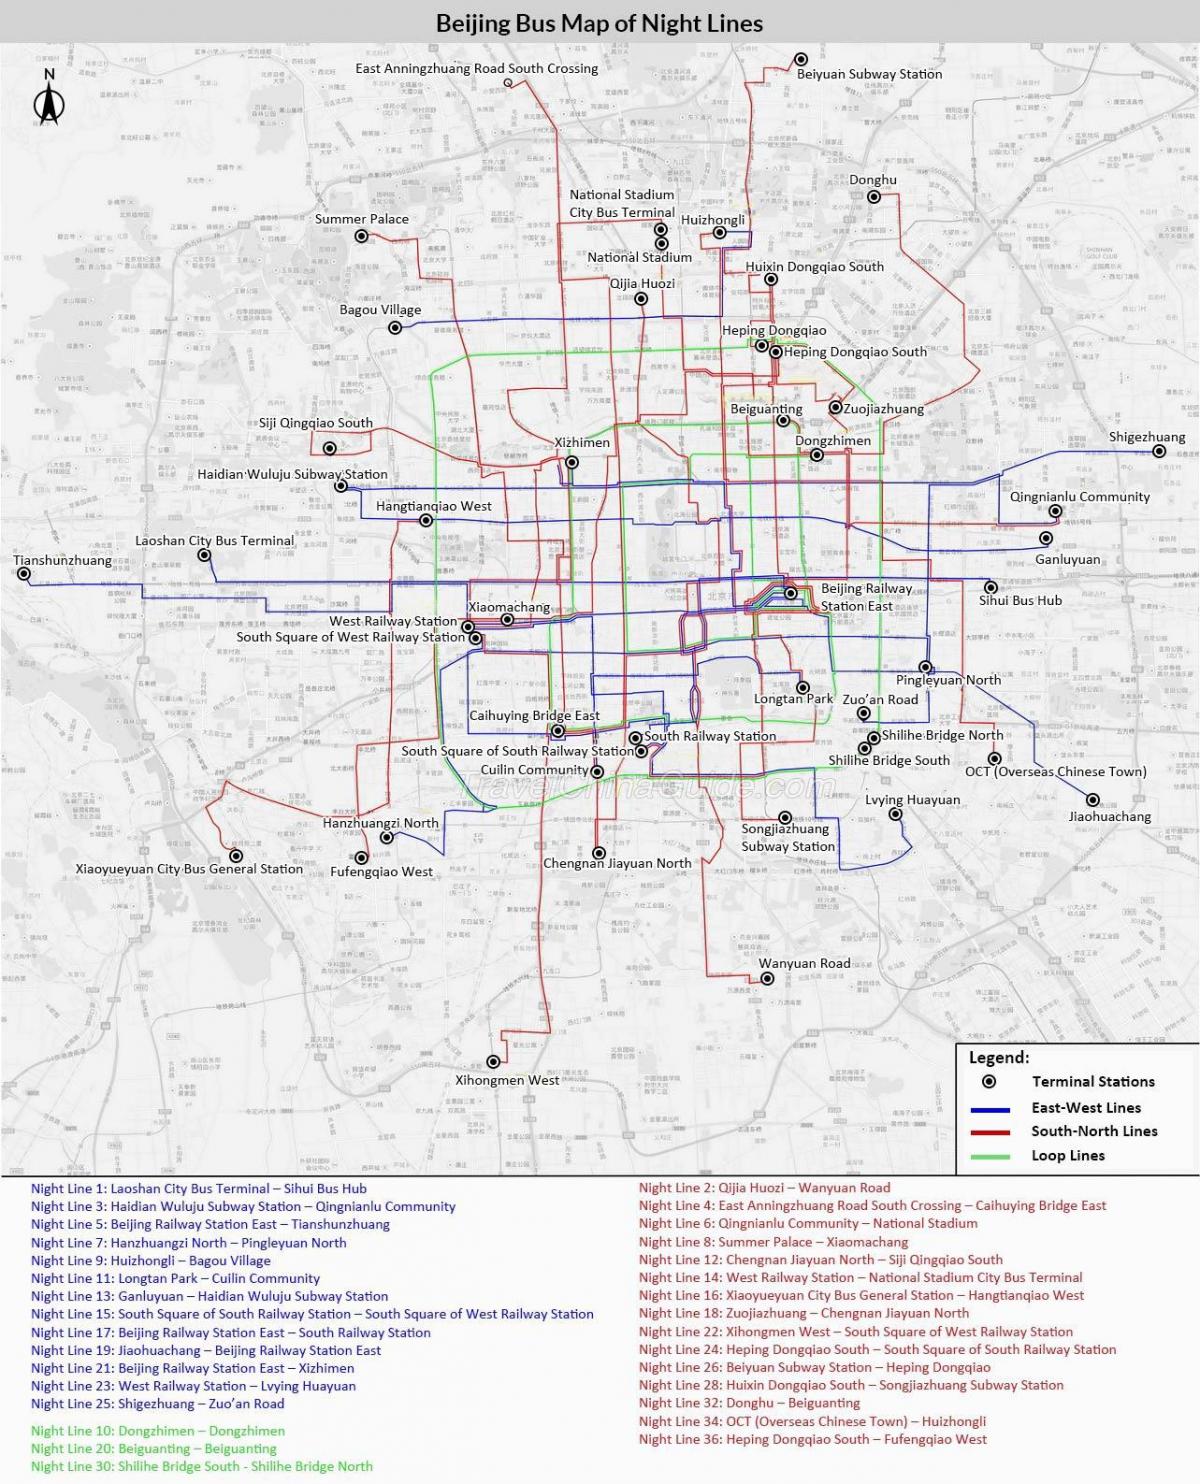 Beijing bus route map